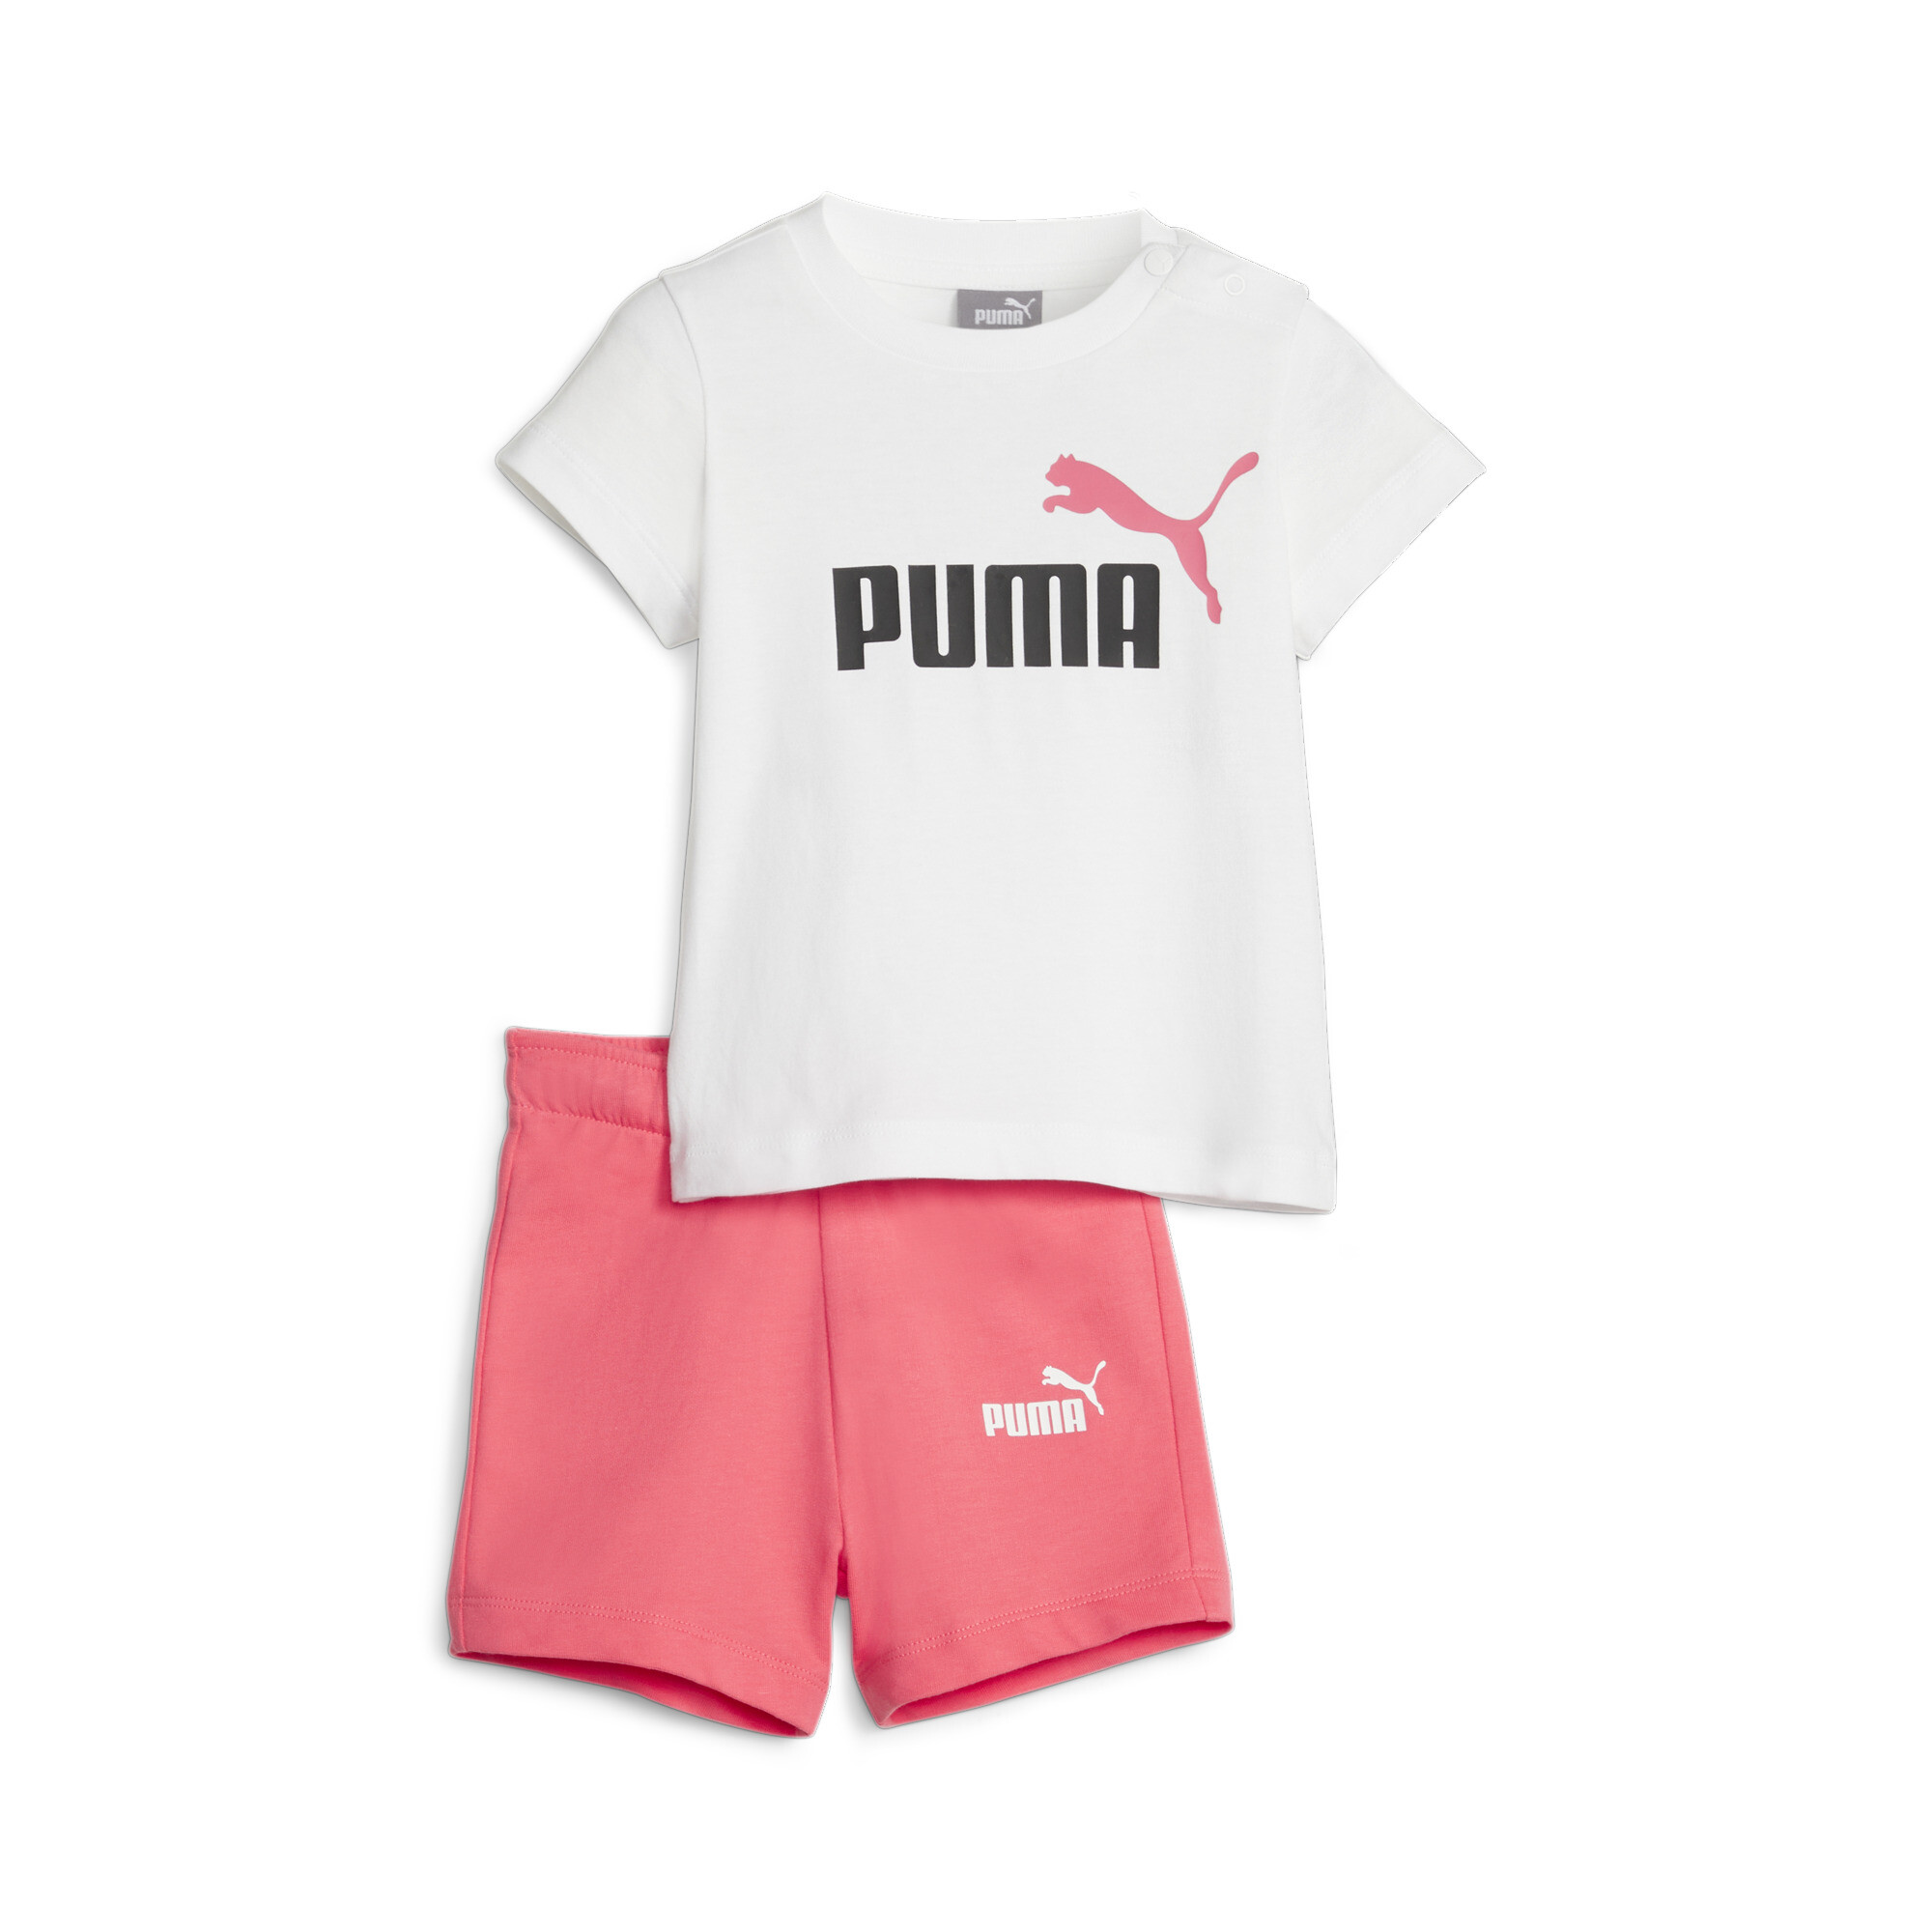 PUMA Minicats T-Shirt And Shorts Babies' Set In Pink, Size 9-12 Months